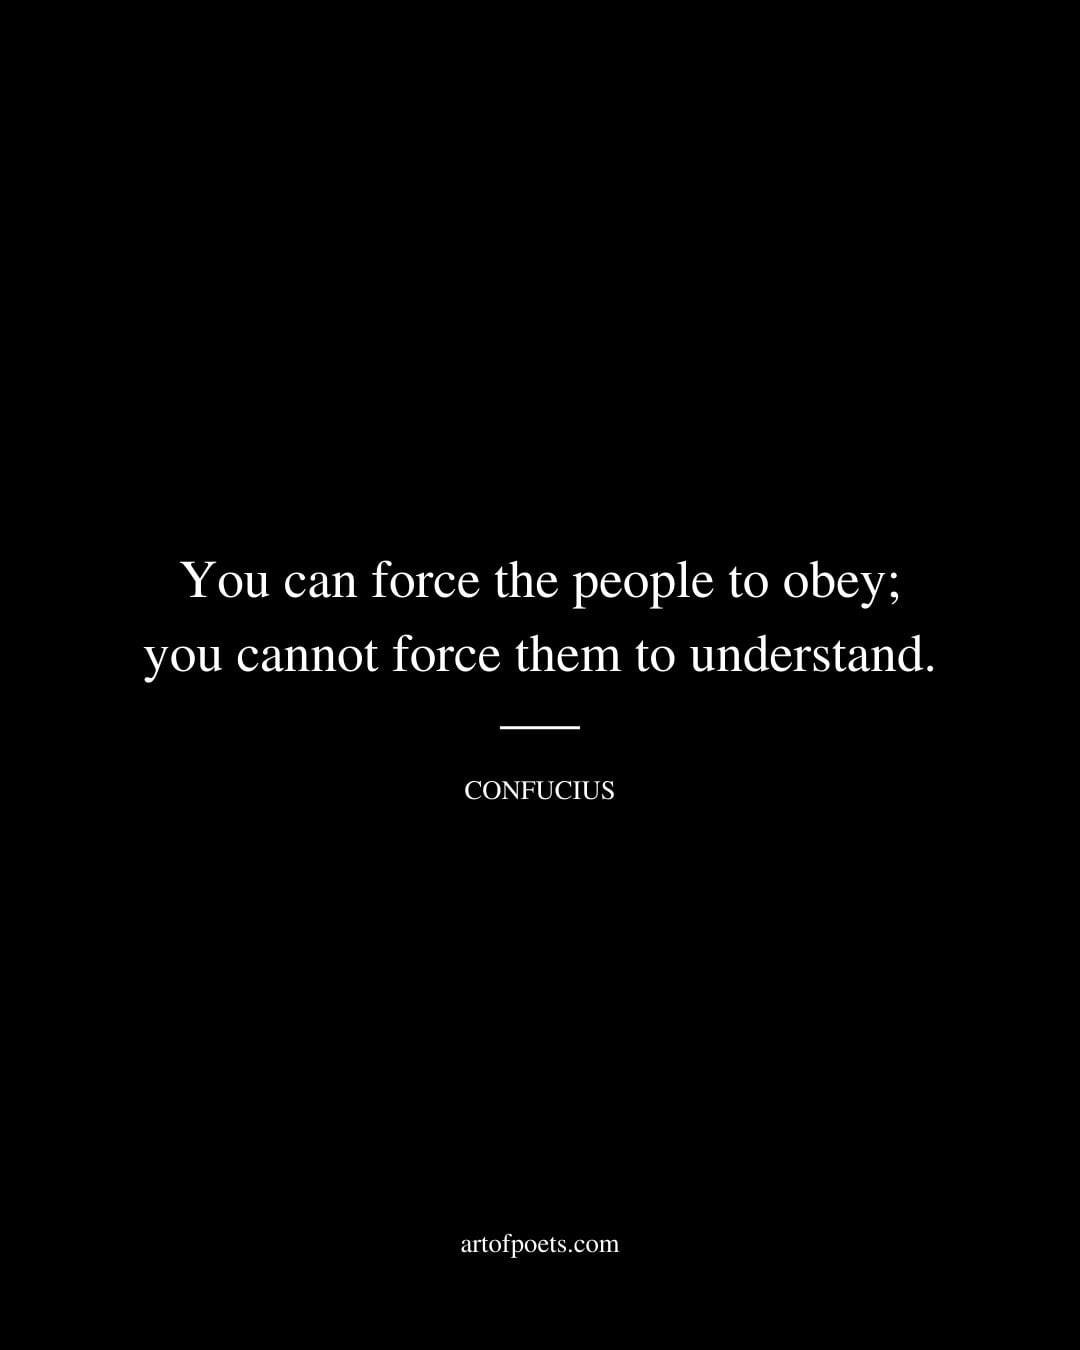 You can force the people to obey you cannot force them to understand